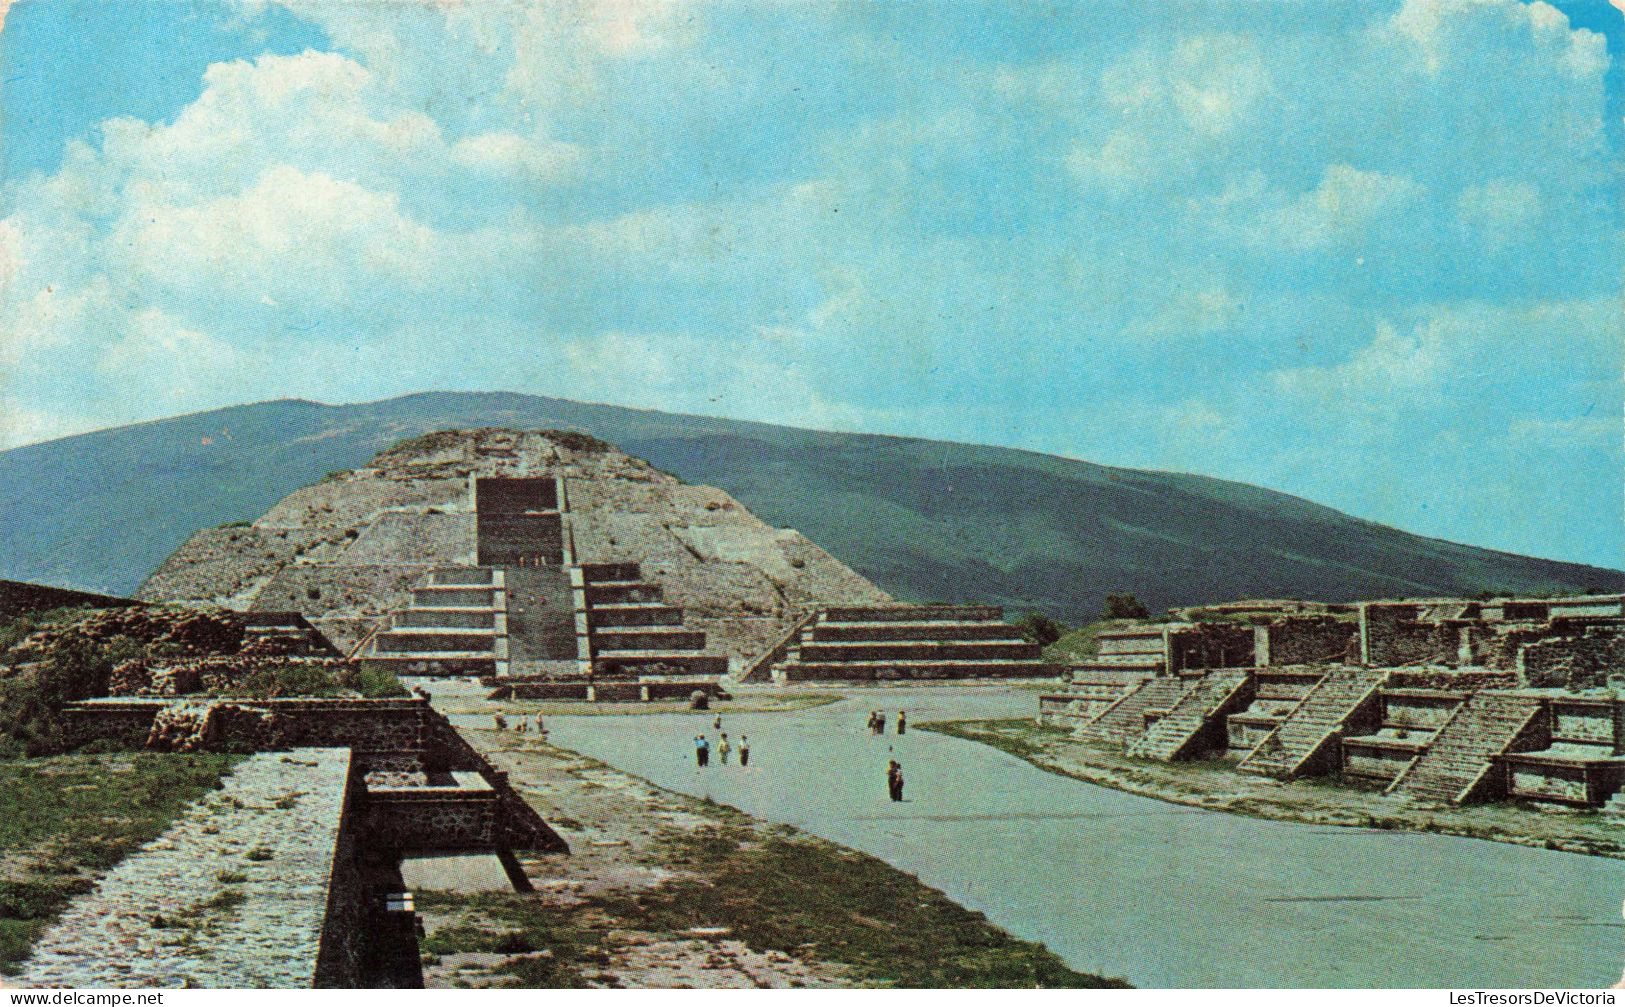 MEXICO - The Moon Pyramid At The Back - Colorisé - Carte Postale Ancienne - Mexiko